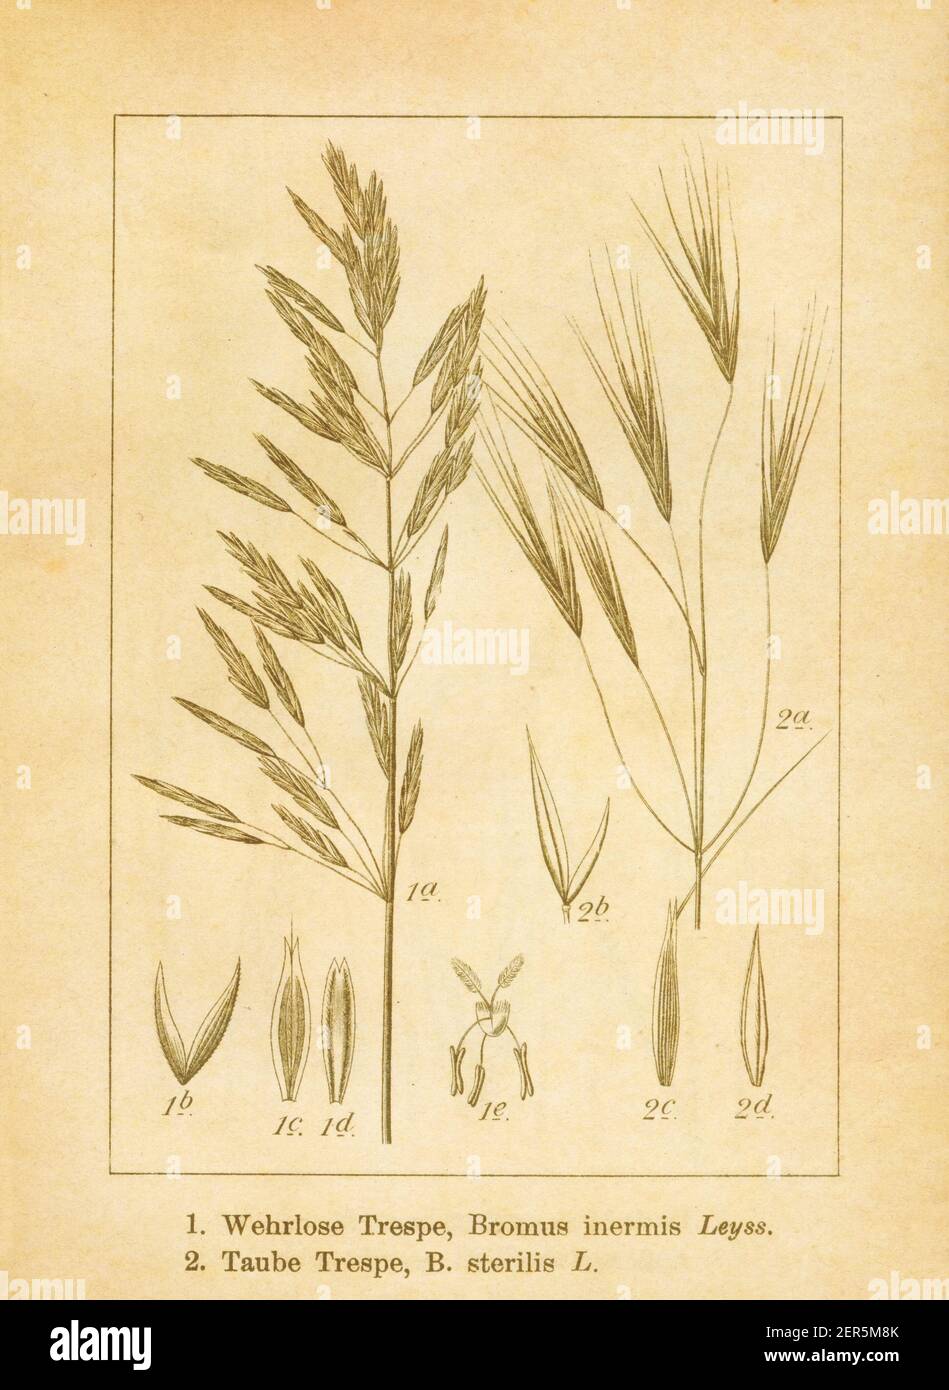 Antique illustration of bromus inermis (also known as smooth brome) and bromus sterilis (also known as poverty brome, barren brome and sterile brome). Stock Photo